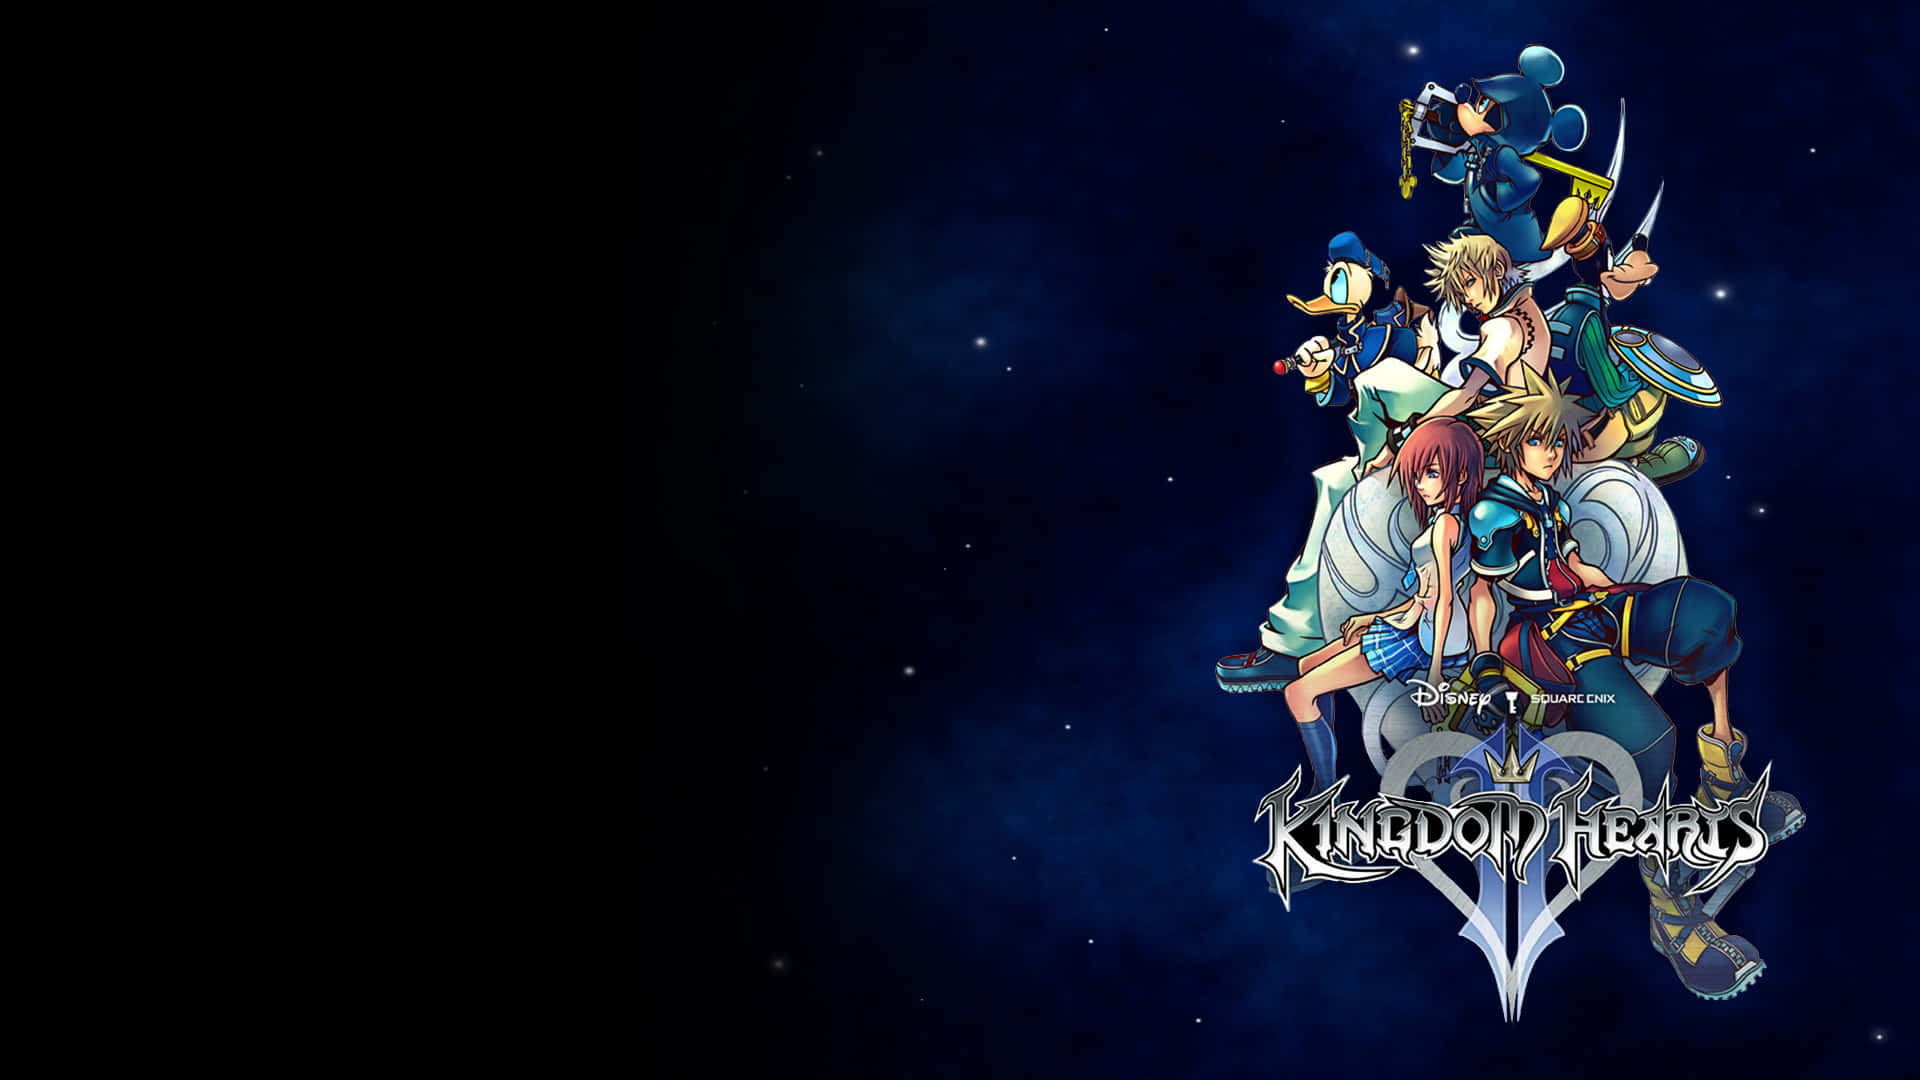 Unlock a fantastical world with the beloved Kingdom Hearts franchise.